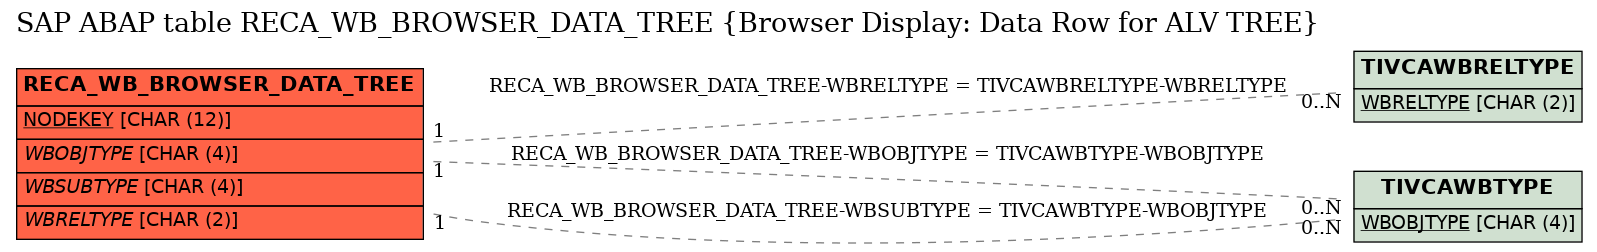 E-R Diagram for table RECA_WB_BROWSER_DATA_TREE (Browser Display: Data Row for ALV TREE)